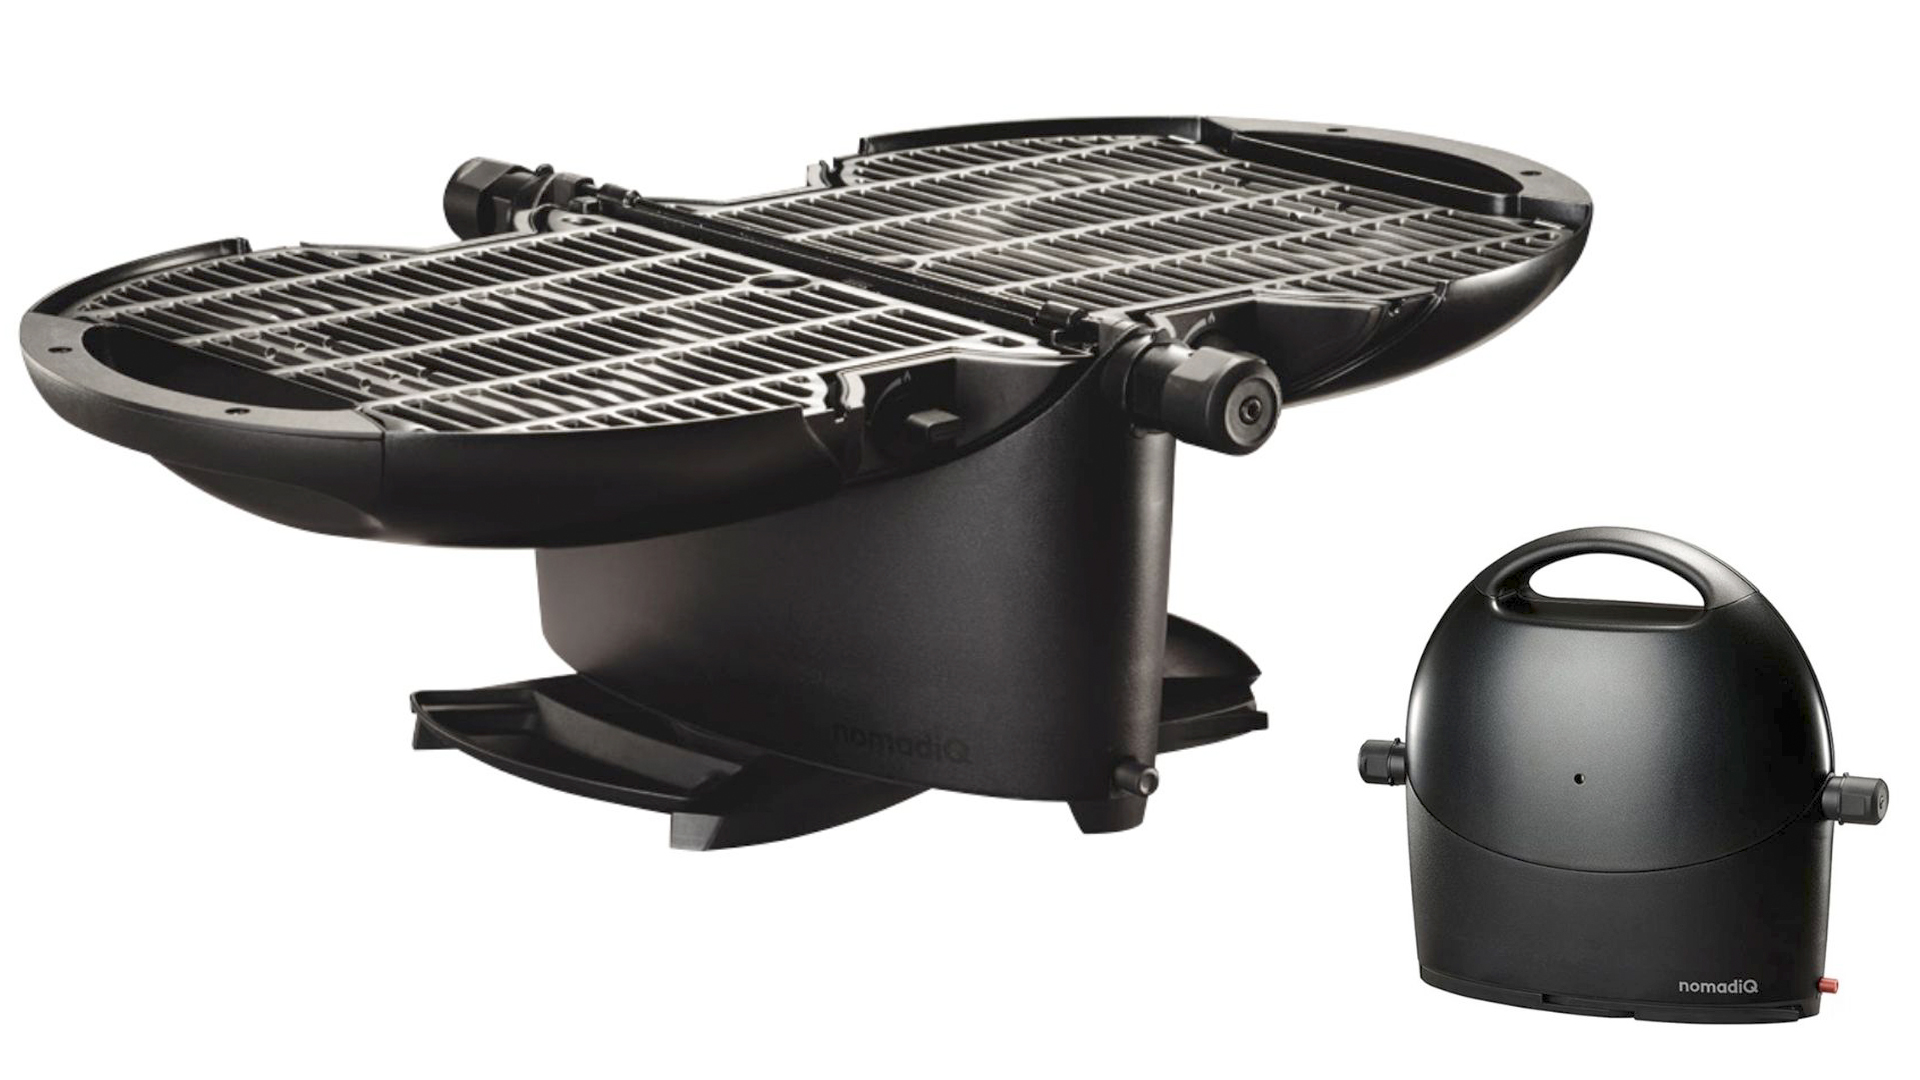 Perth Blackborough Subtropisch Snooze Preview: nomadiQ Gas Grill | An Official Journal Of The NRA